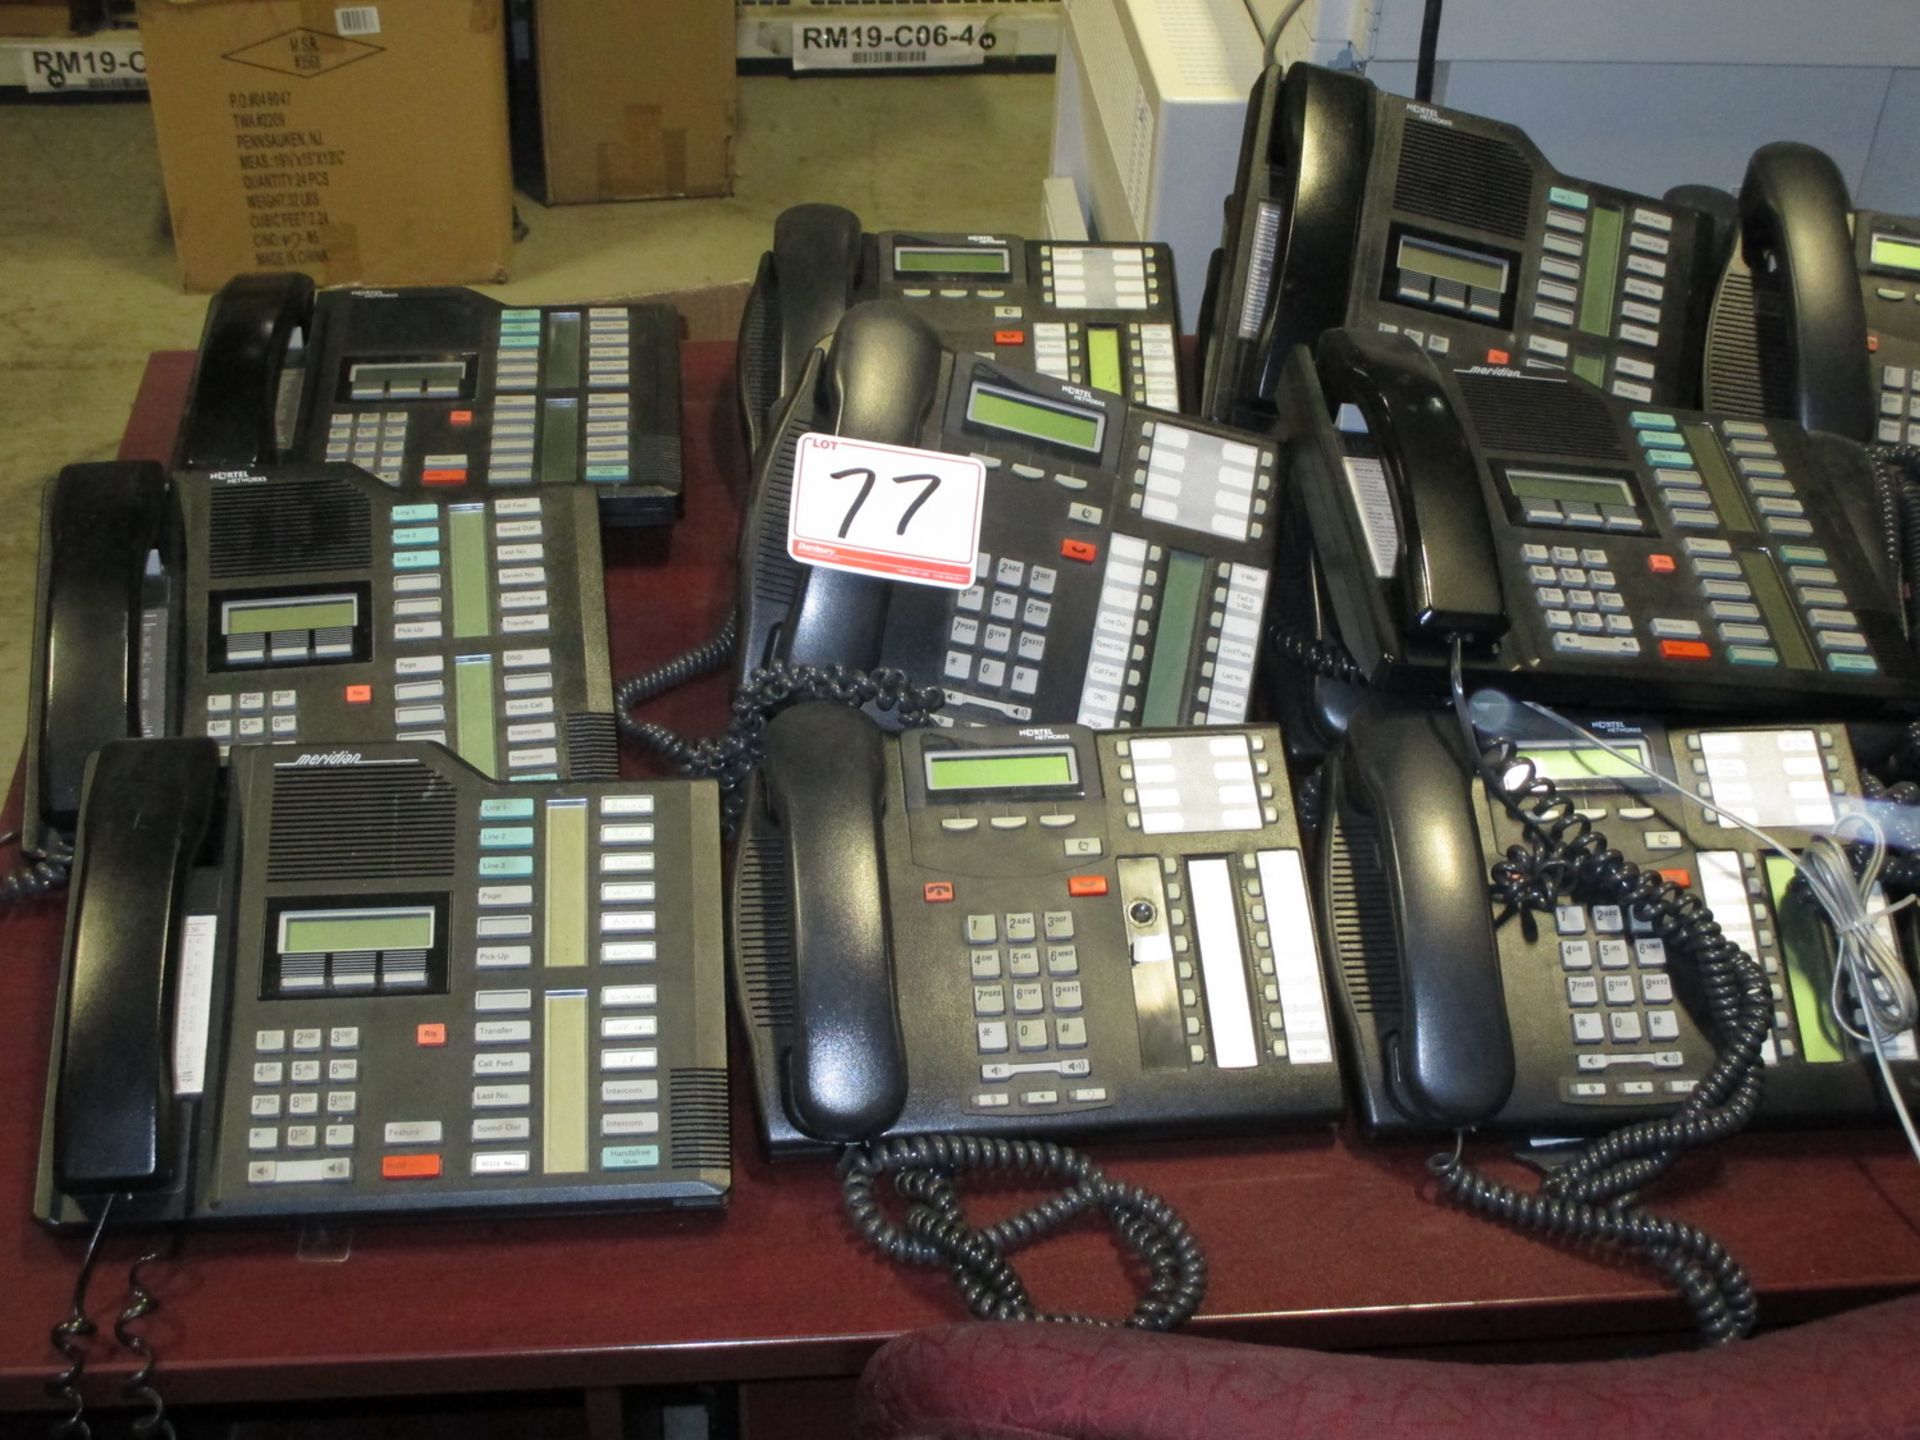 LOT - NORTEL TELEPHONE SYST4EM W/ 2 VOICEMAIL UNITS, 50 HANDSETS - Image 2 of 2